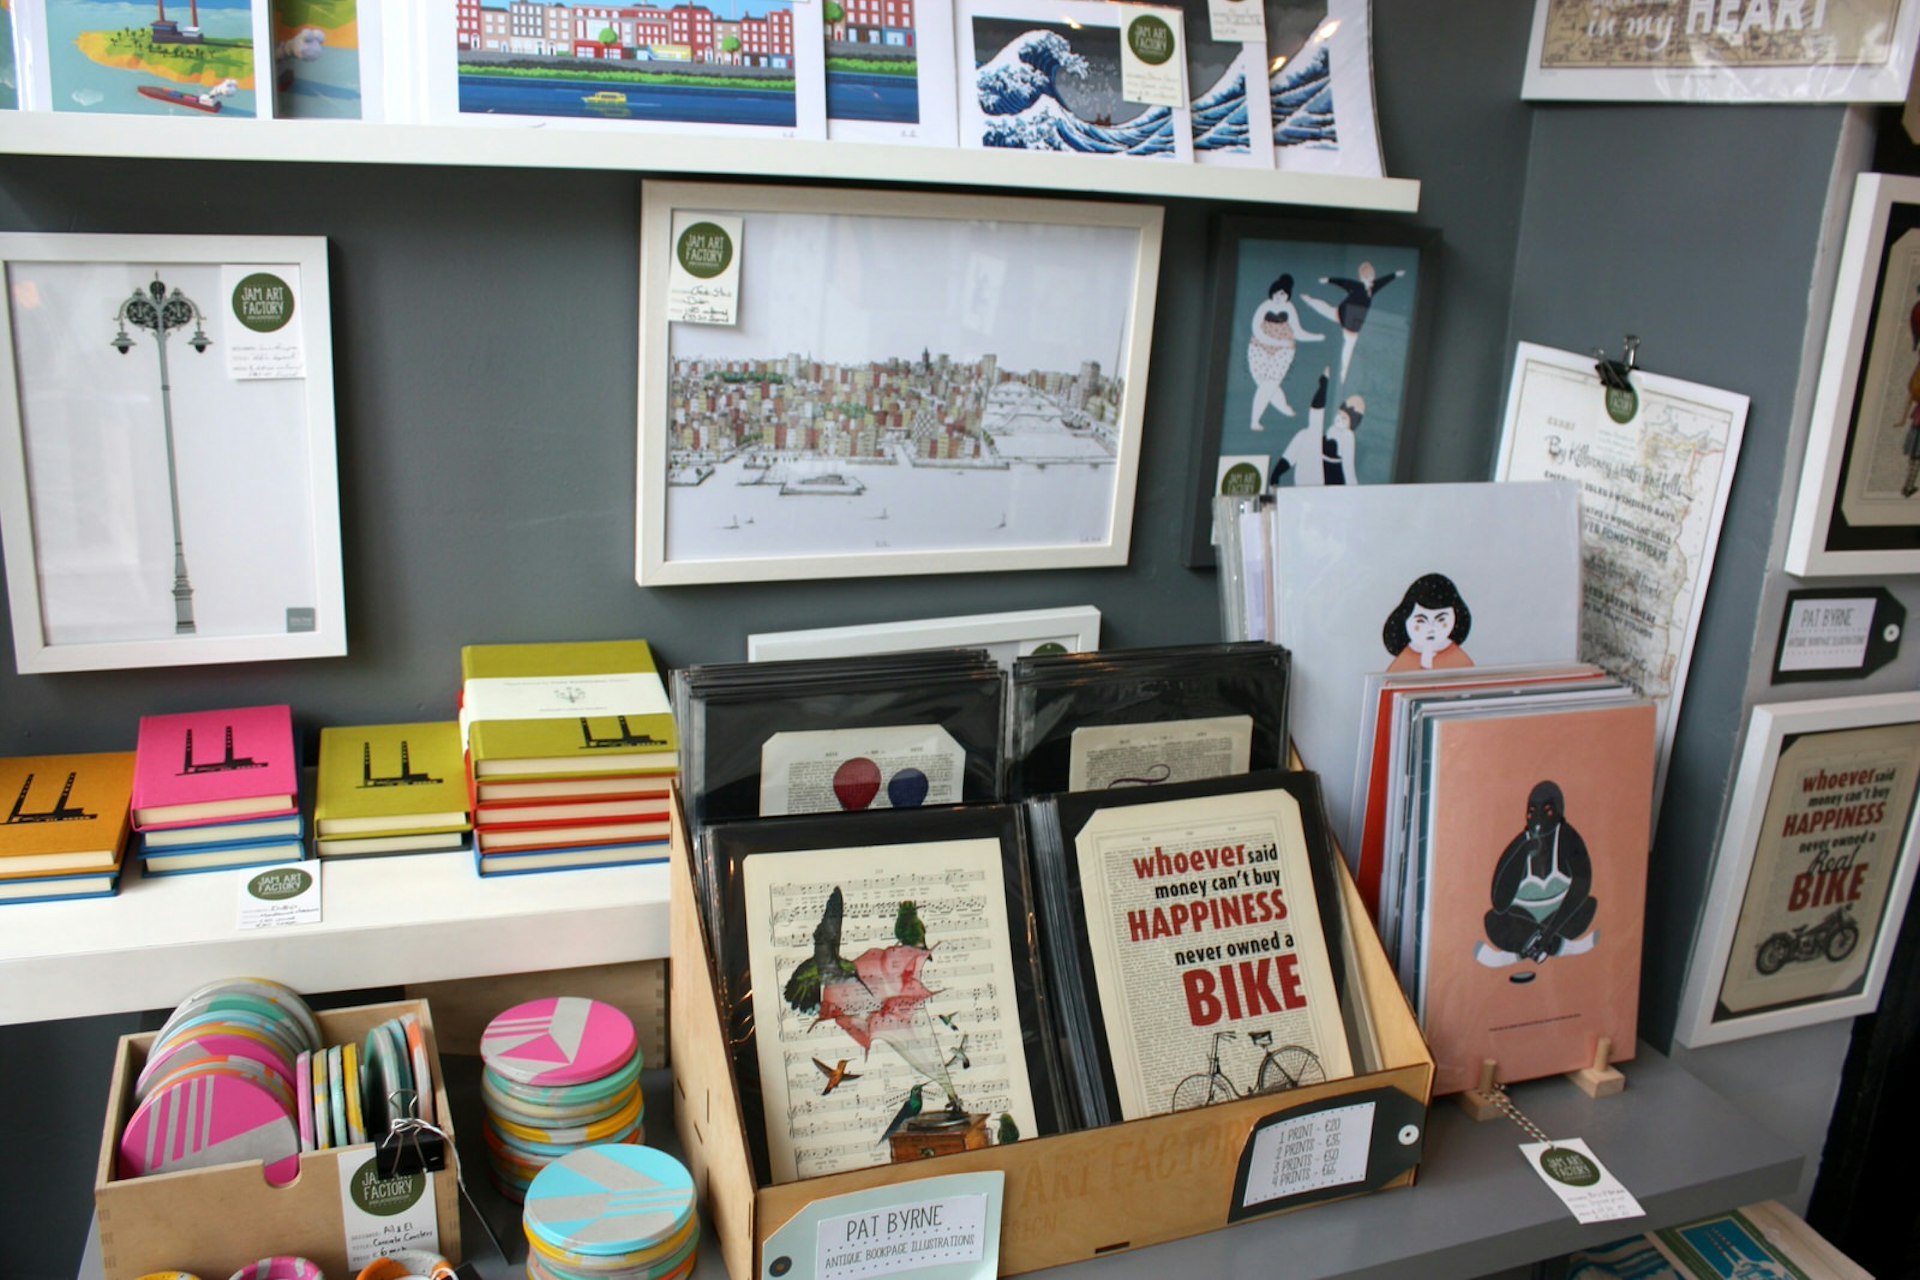 Dublin independent shops - a close shot of products on sale at Jam Art Factory showing prints and artwork